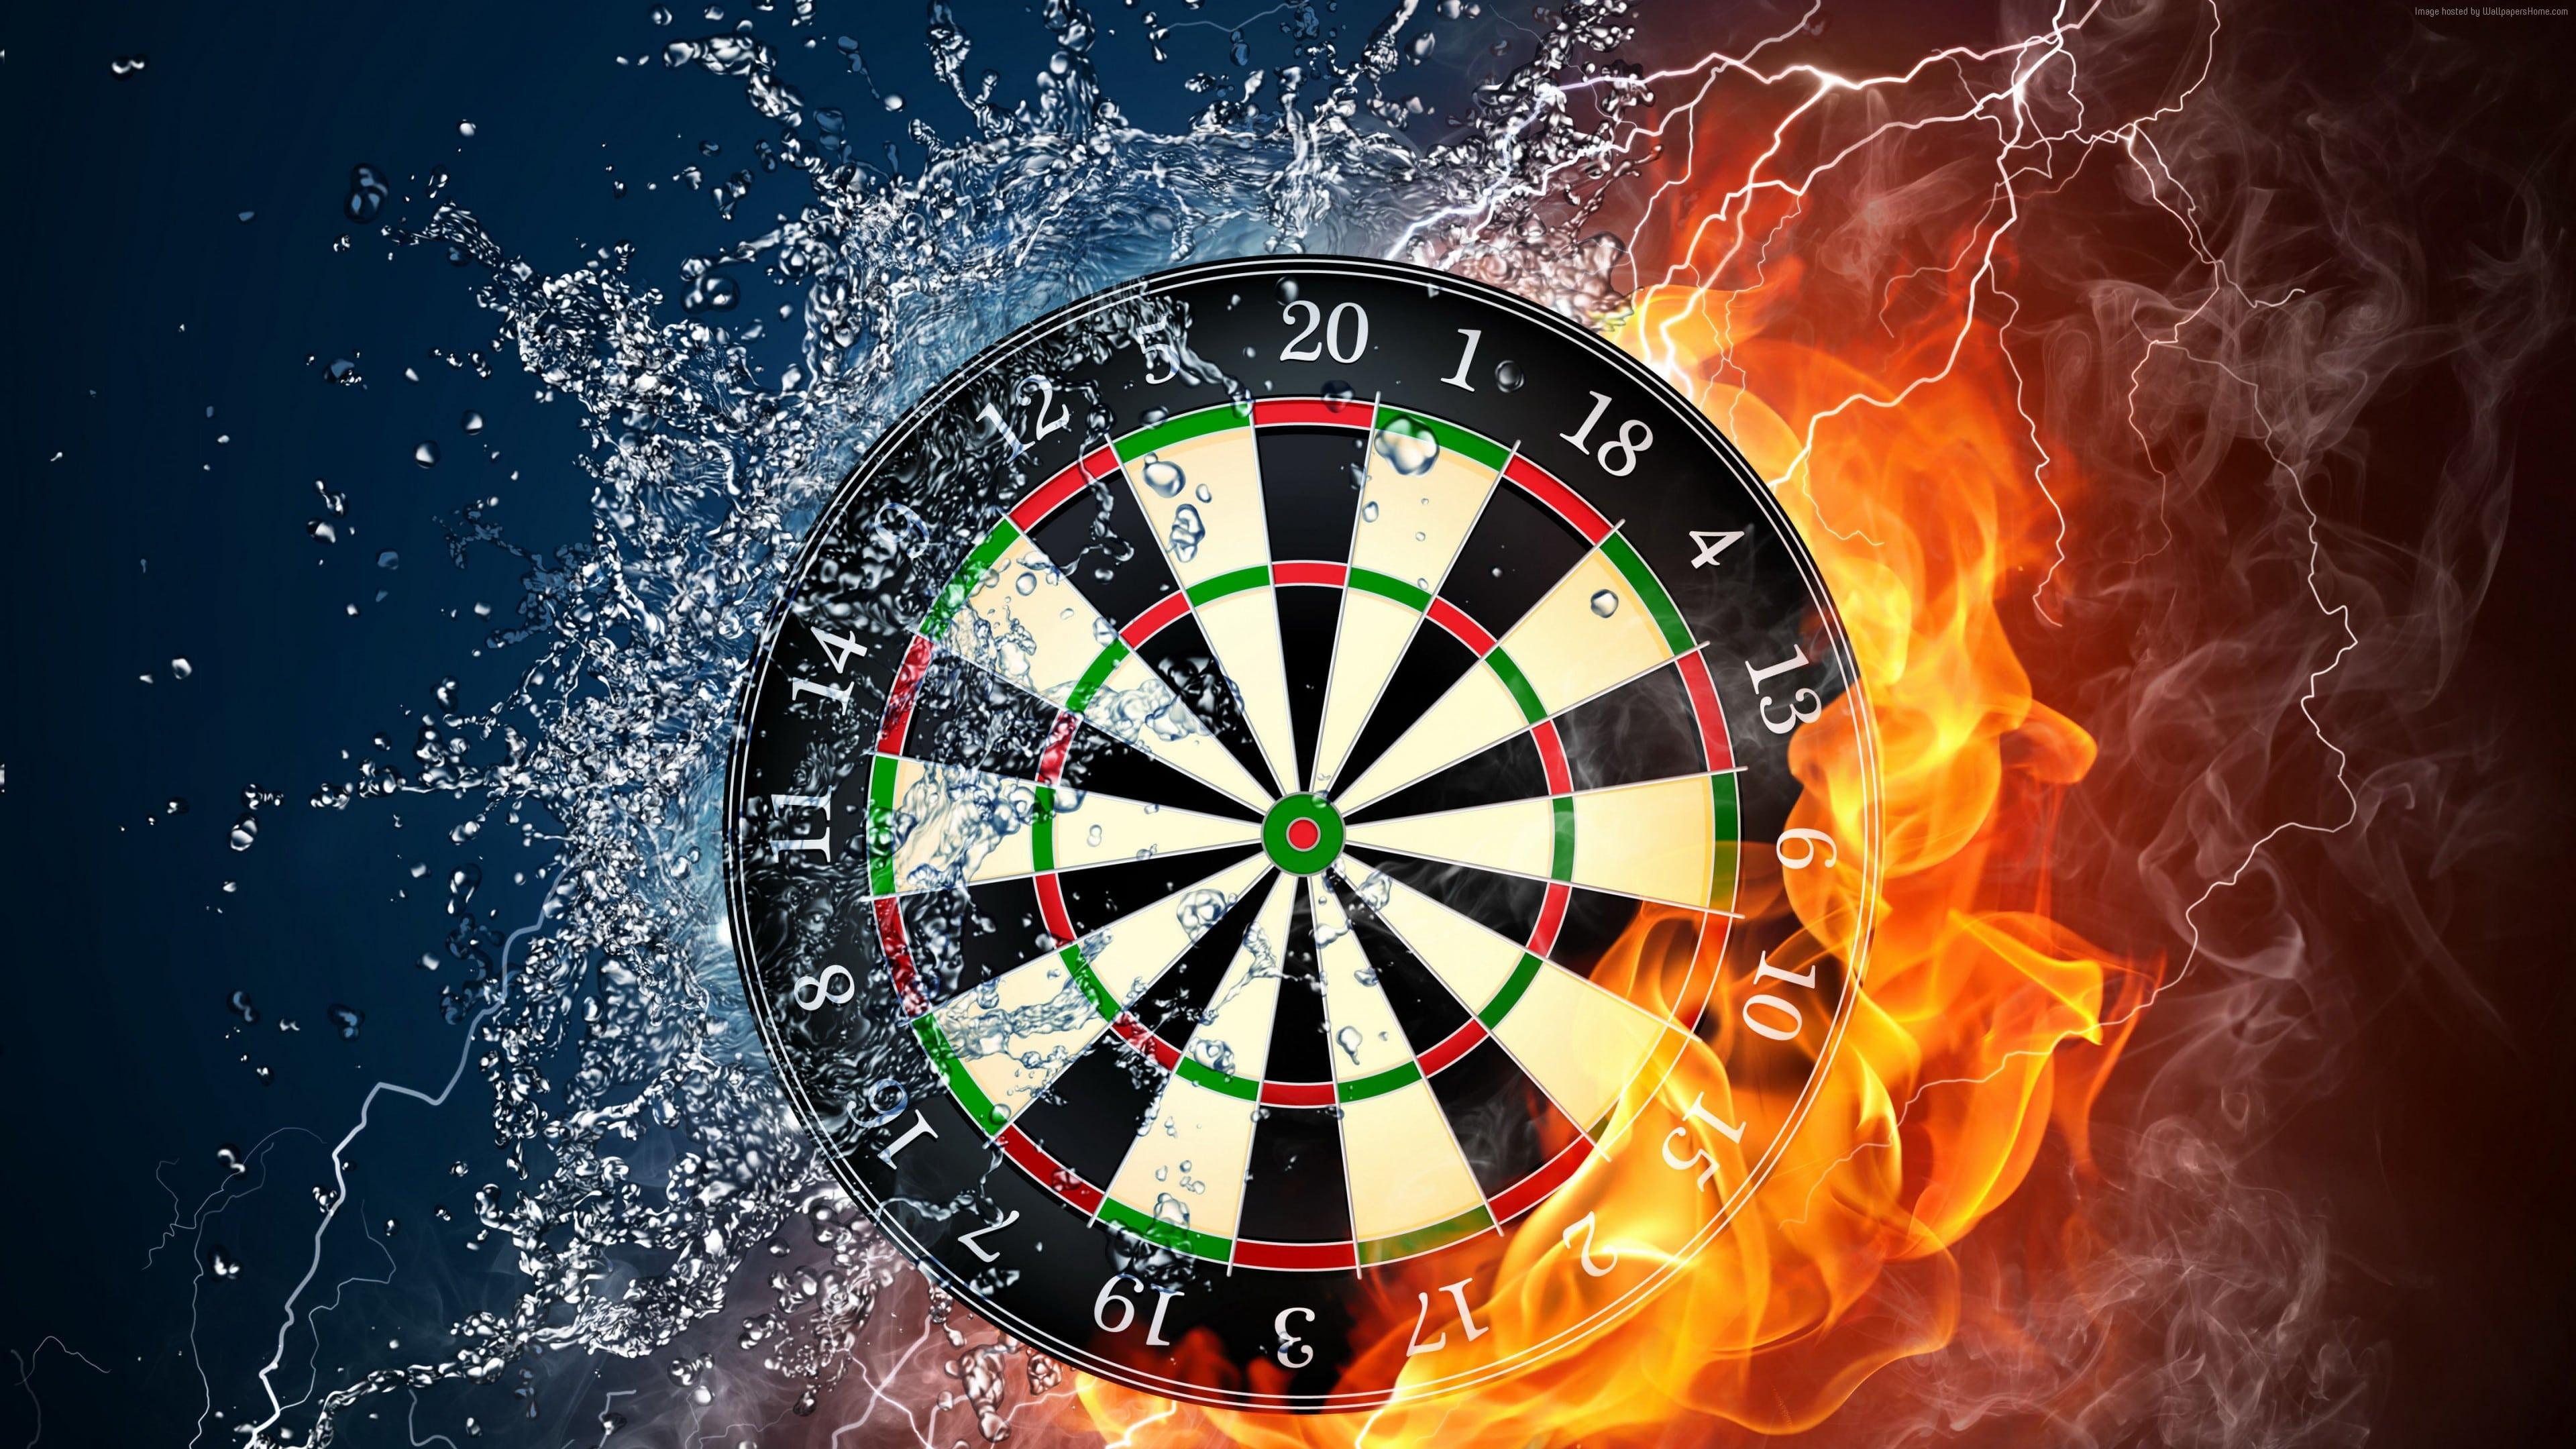 Darts Wheel Target Fire Water Wallpaper and Free